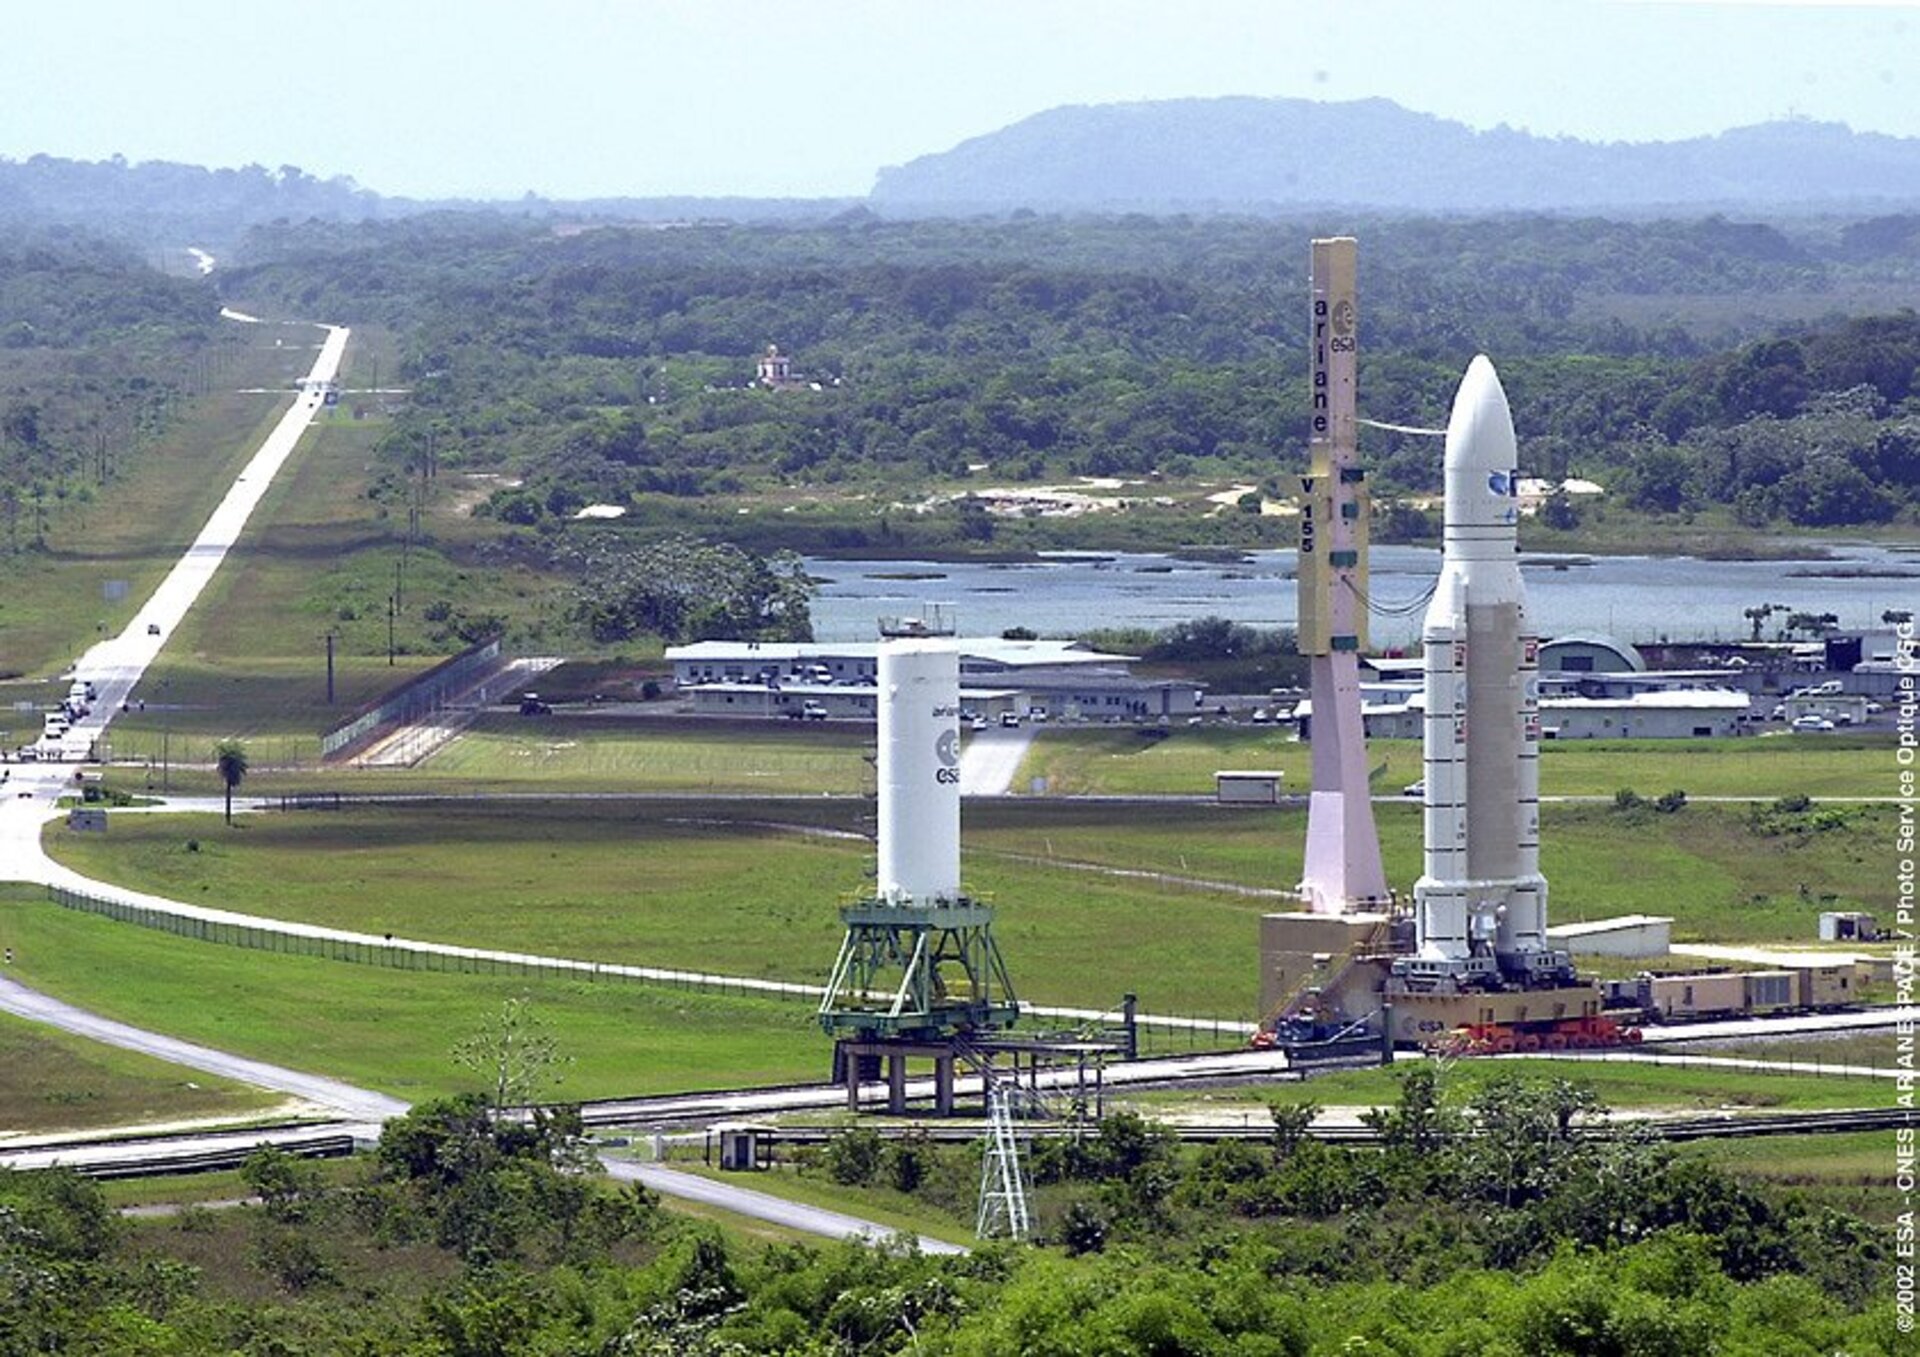 The Ariane 5 moves toward the launch zone